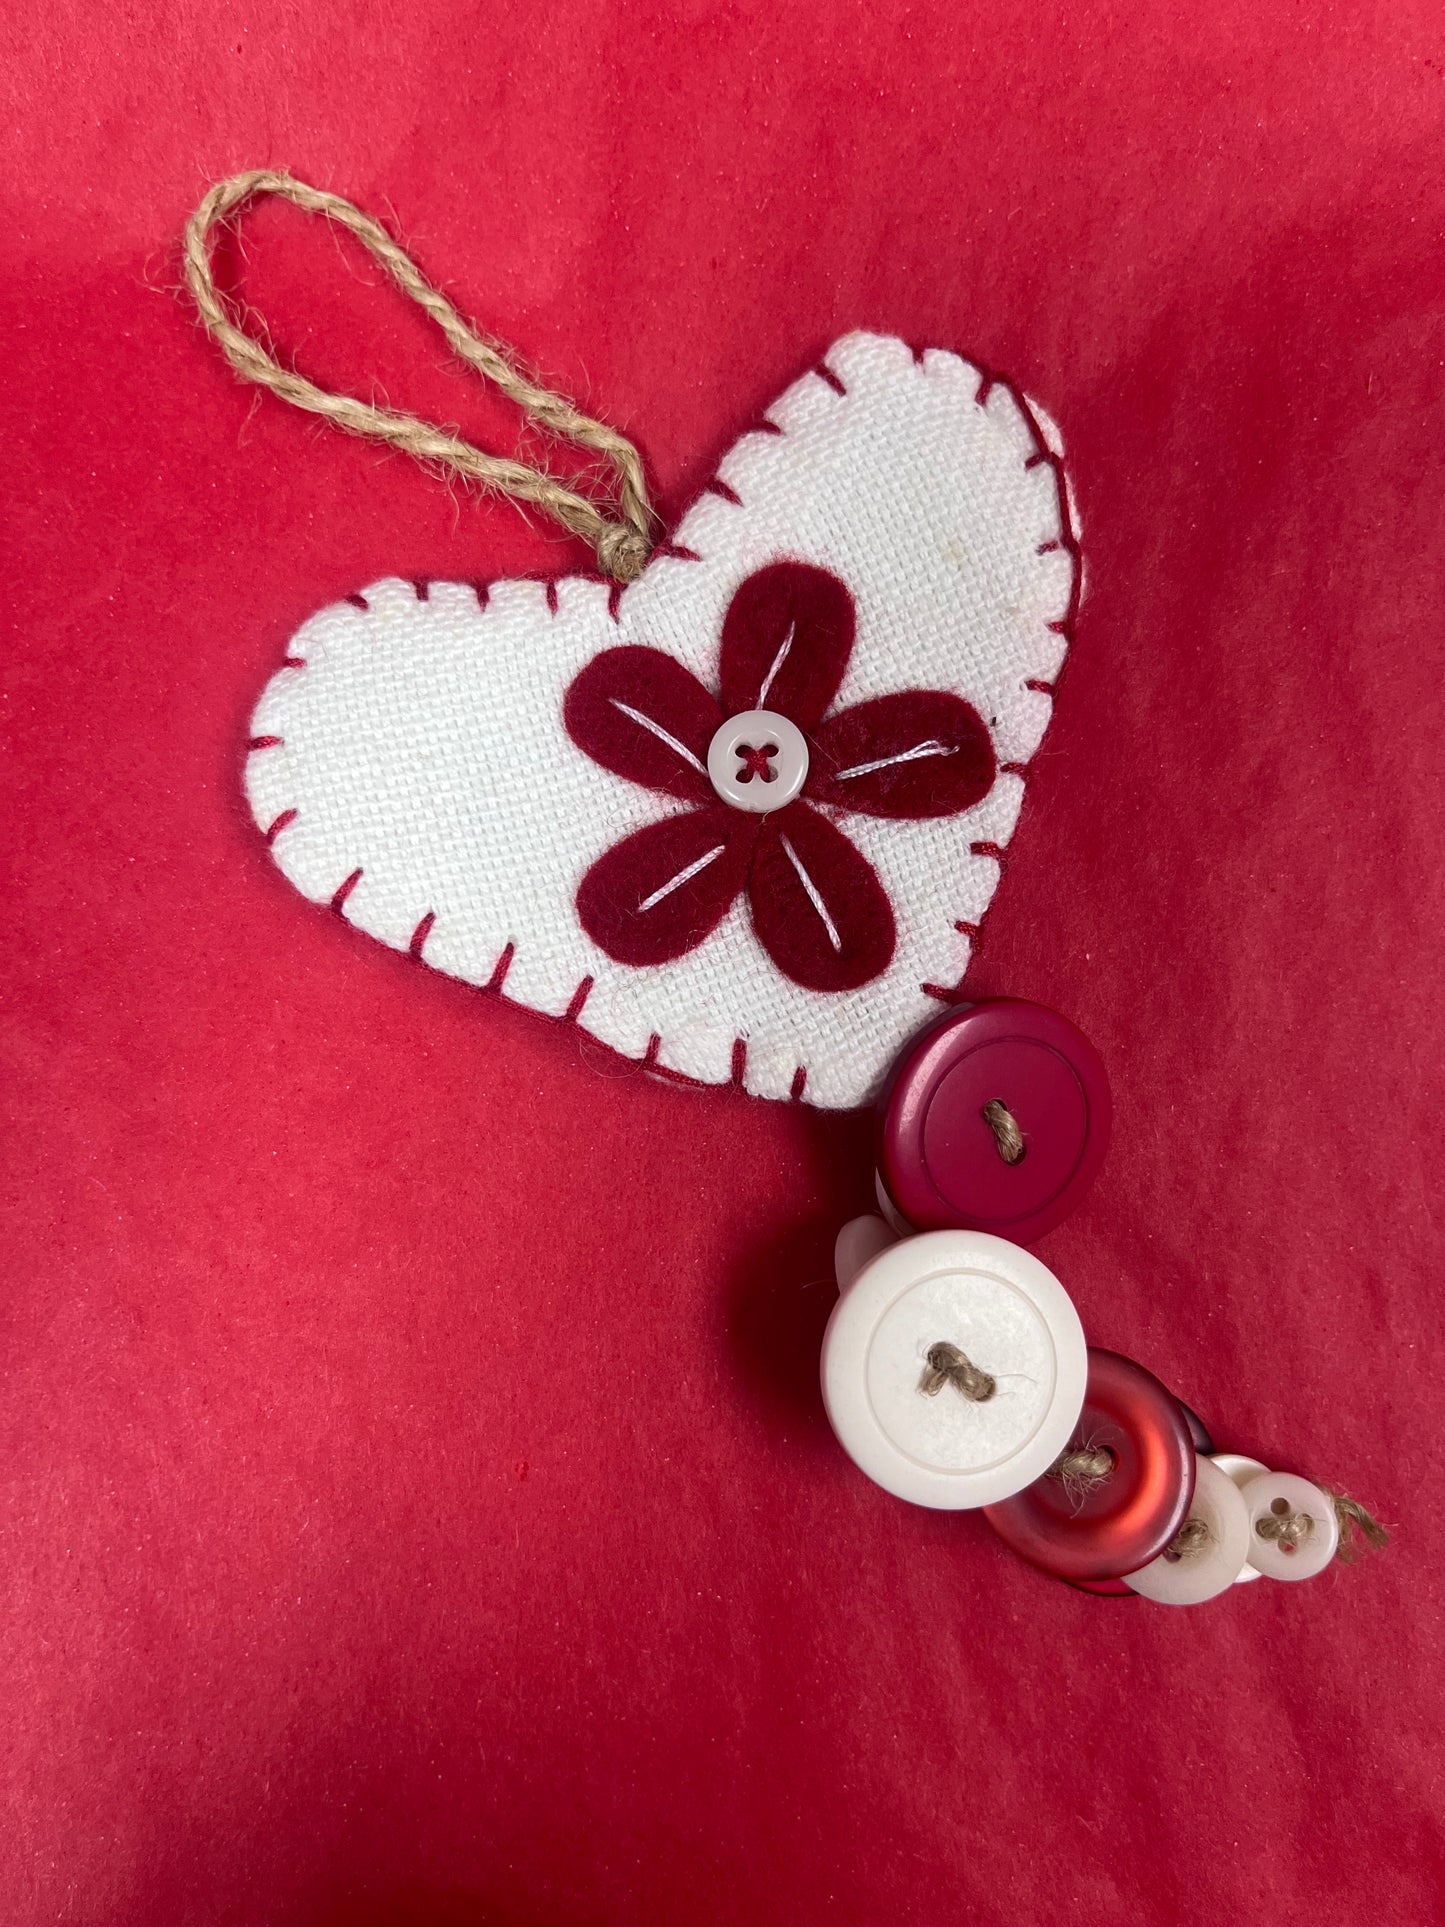 Heart Shaped Ornament with Buttons